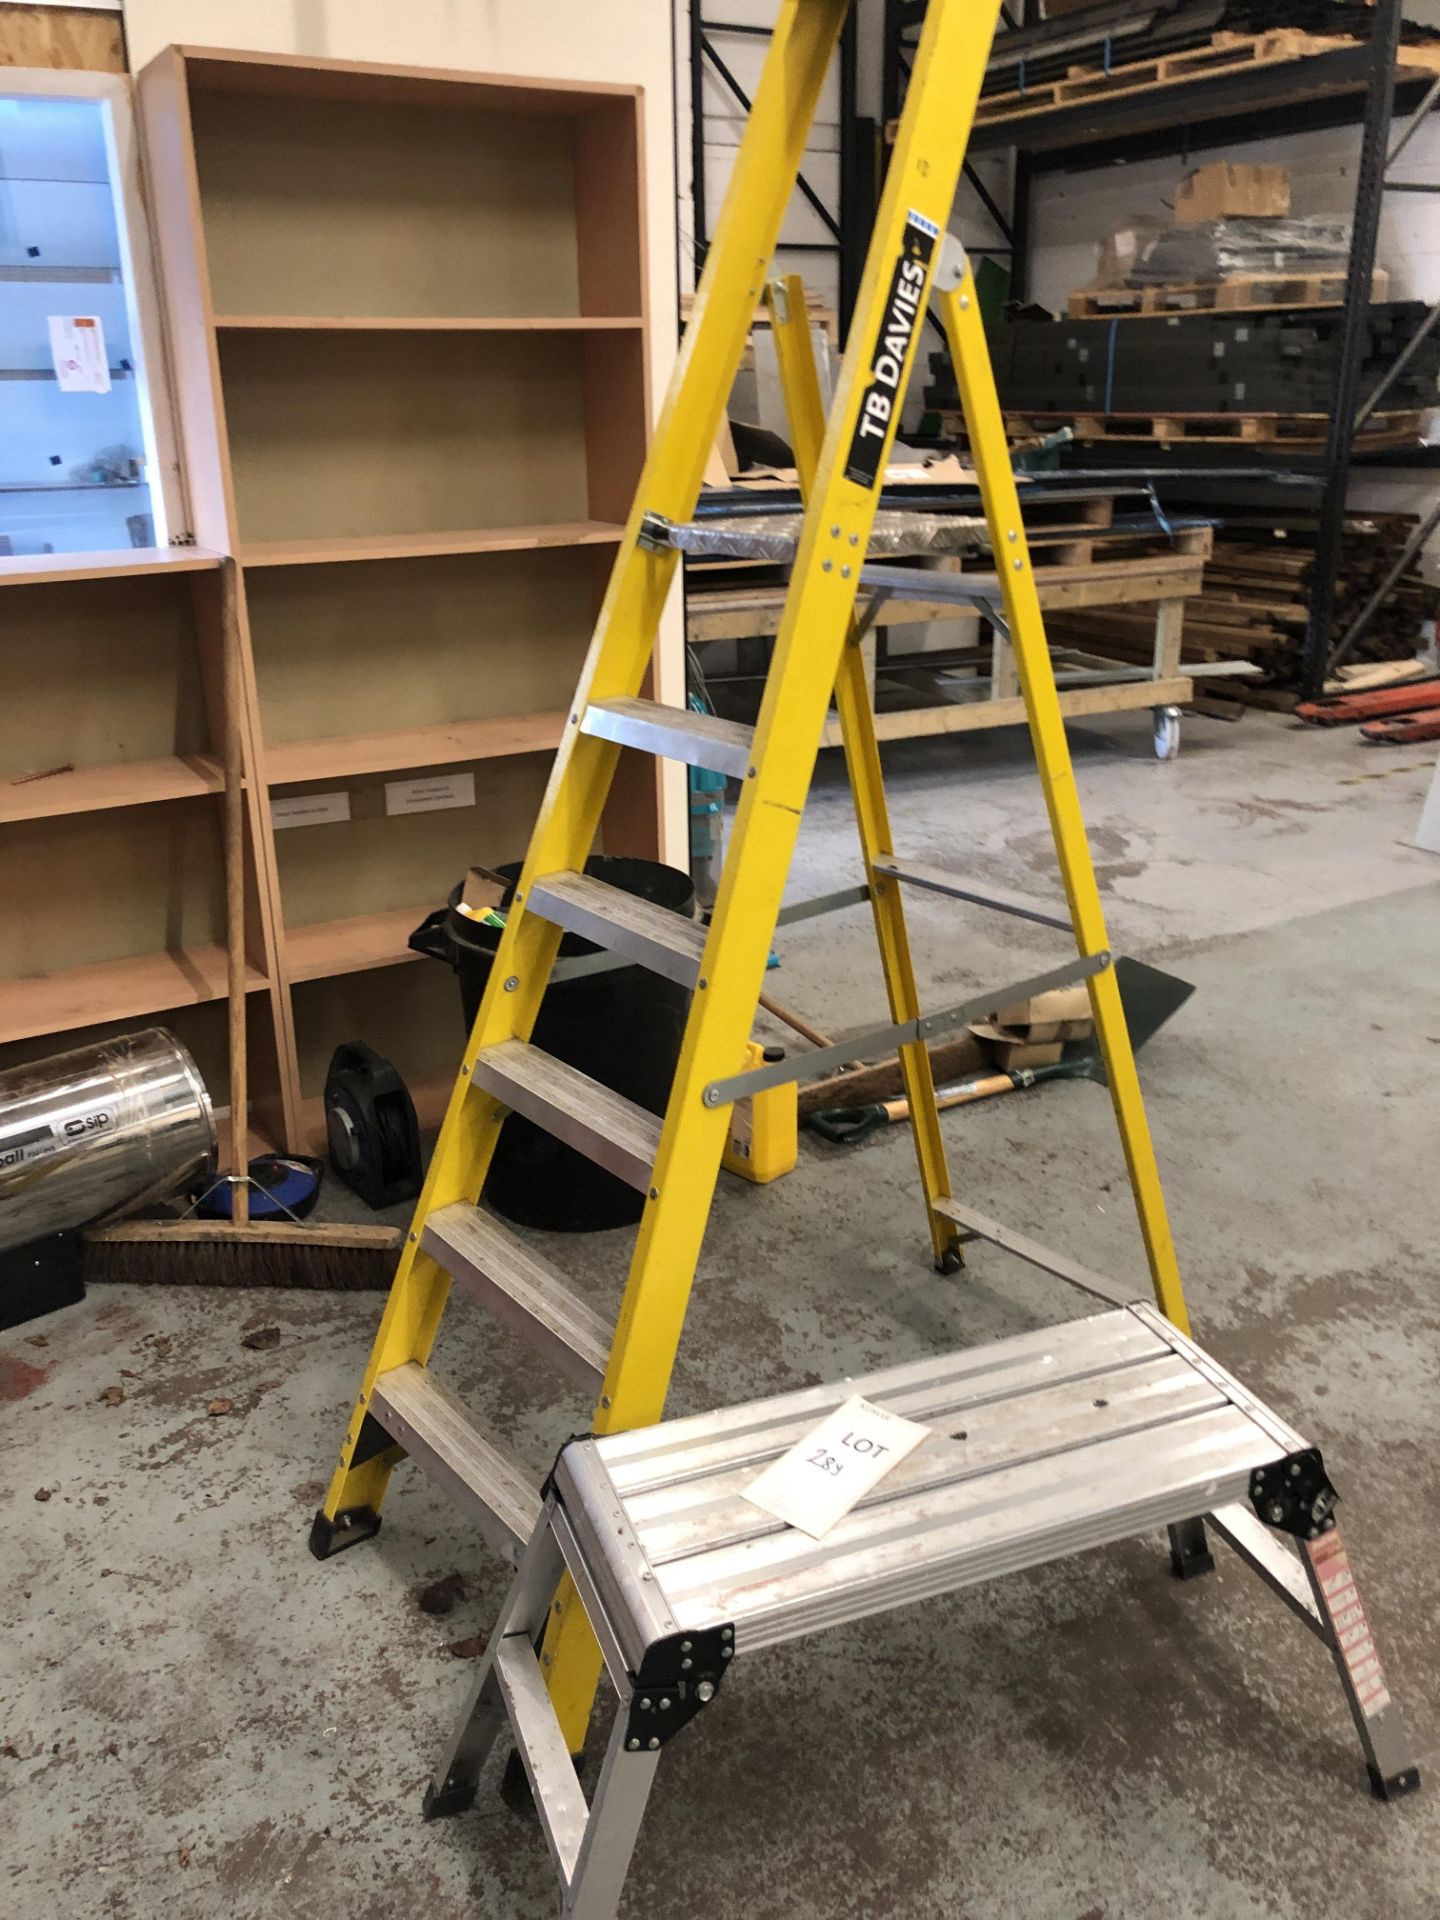 1x Ladder & 1x Small Platform (Please Note: Collection by appointment Tuesday 26th March From